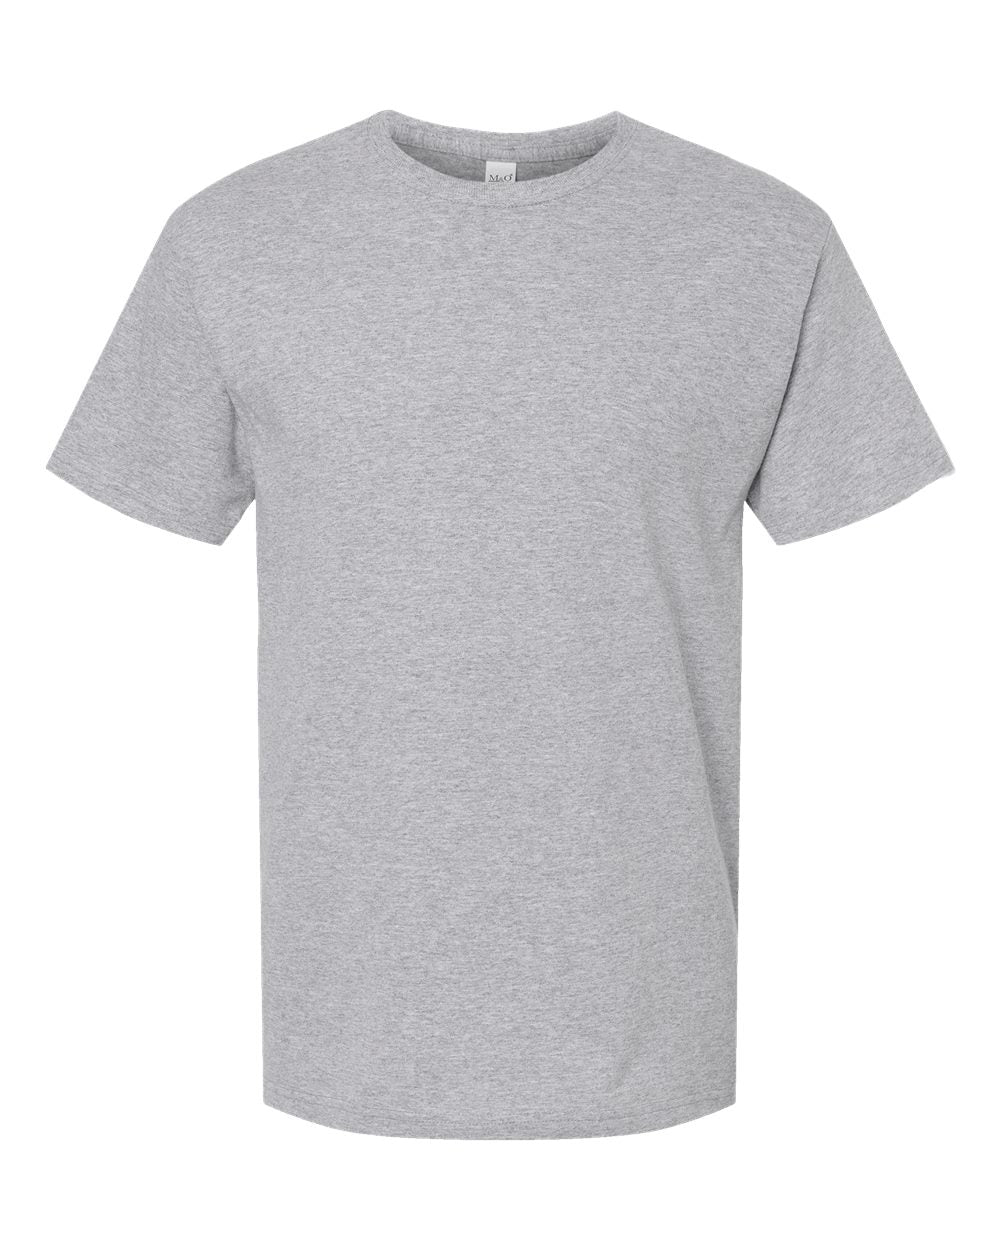 M&O Gold Soft Touch T-Shirt 4800 #color_Sport Grey